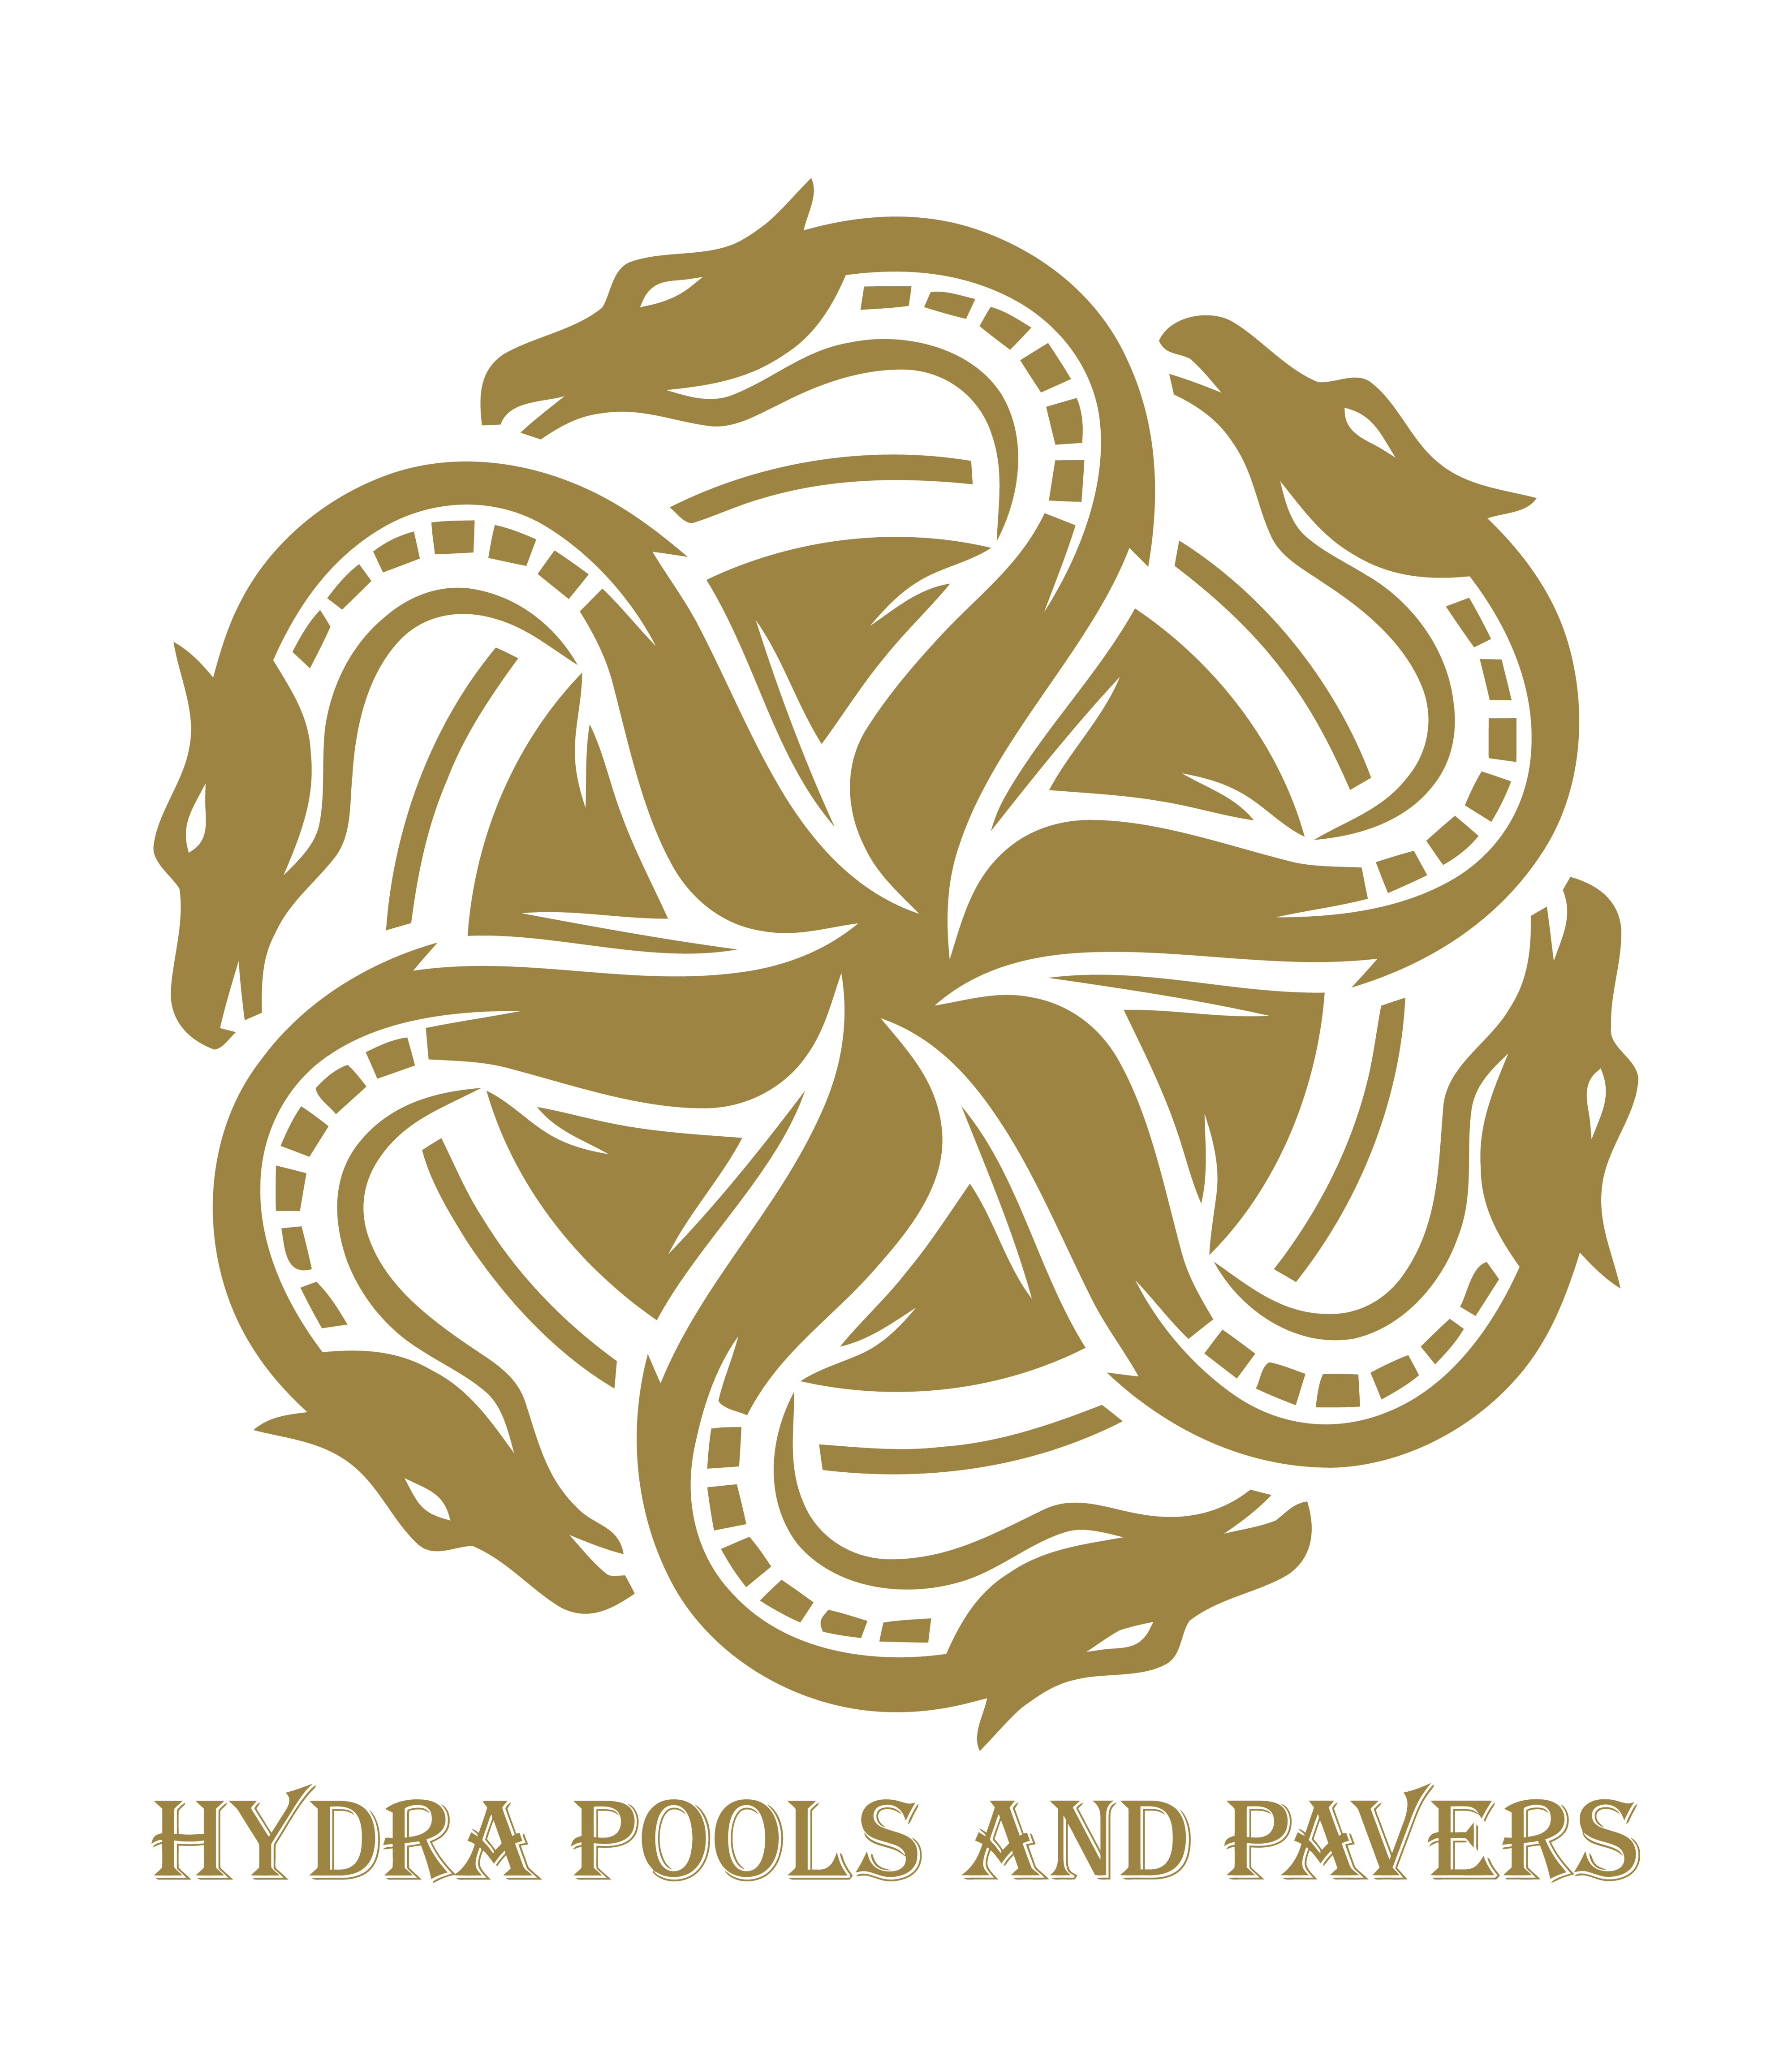 Hydra Pools and Pavers